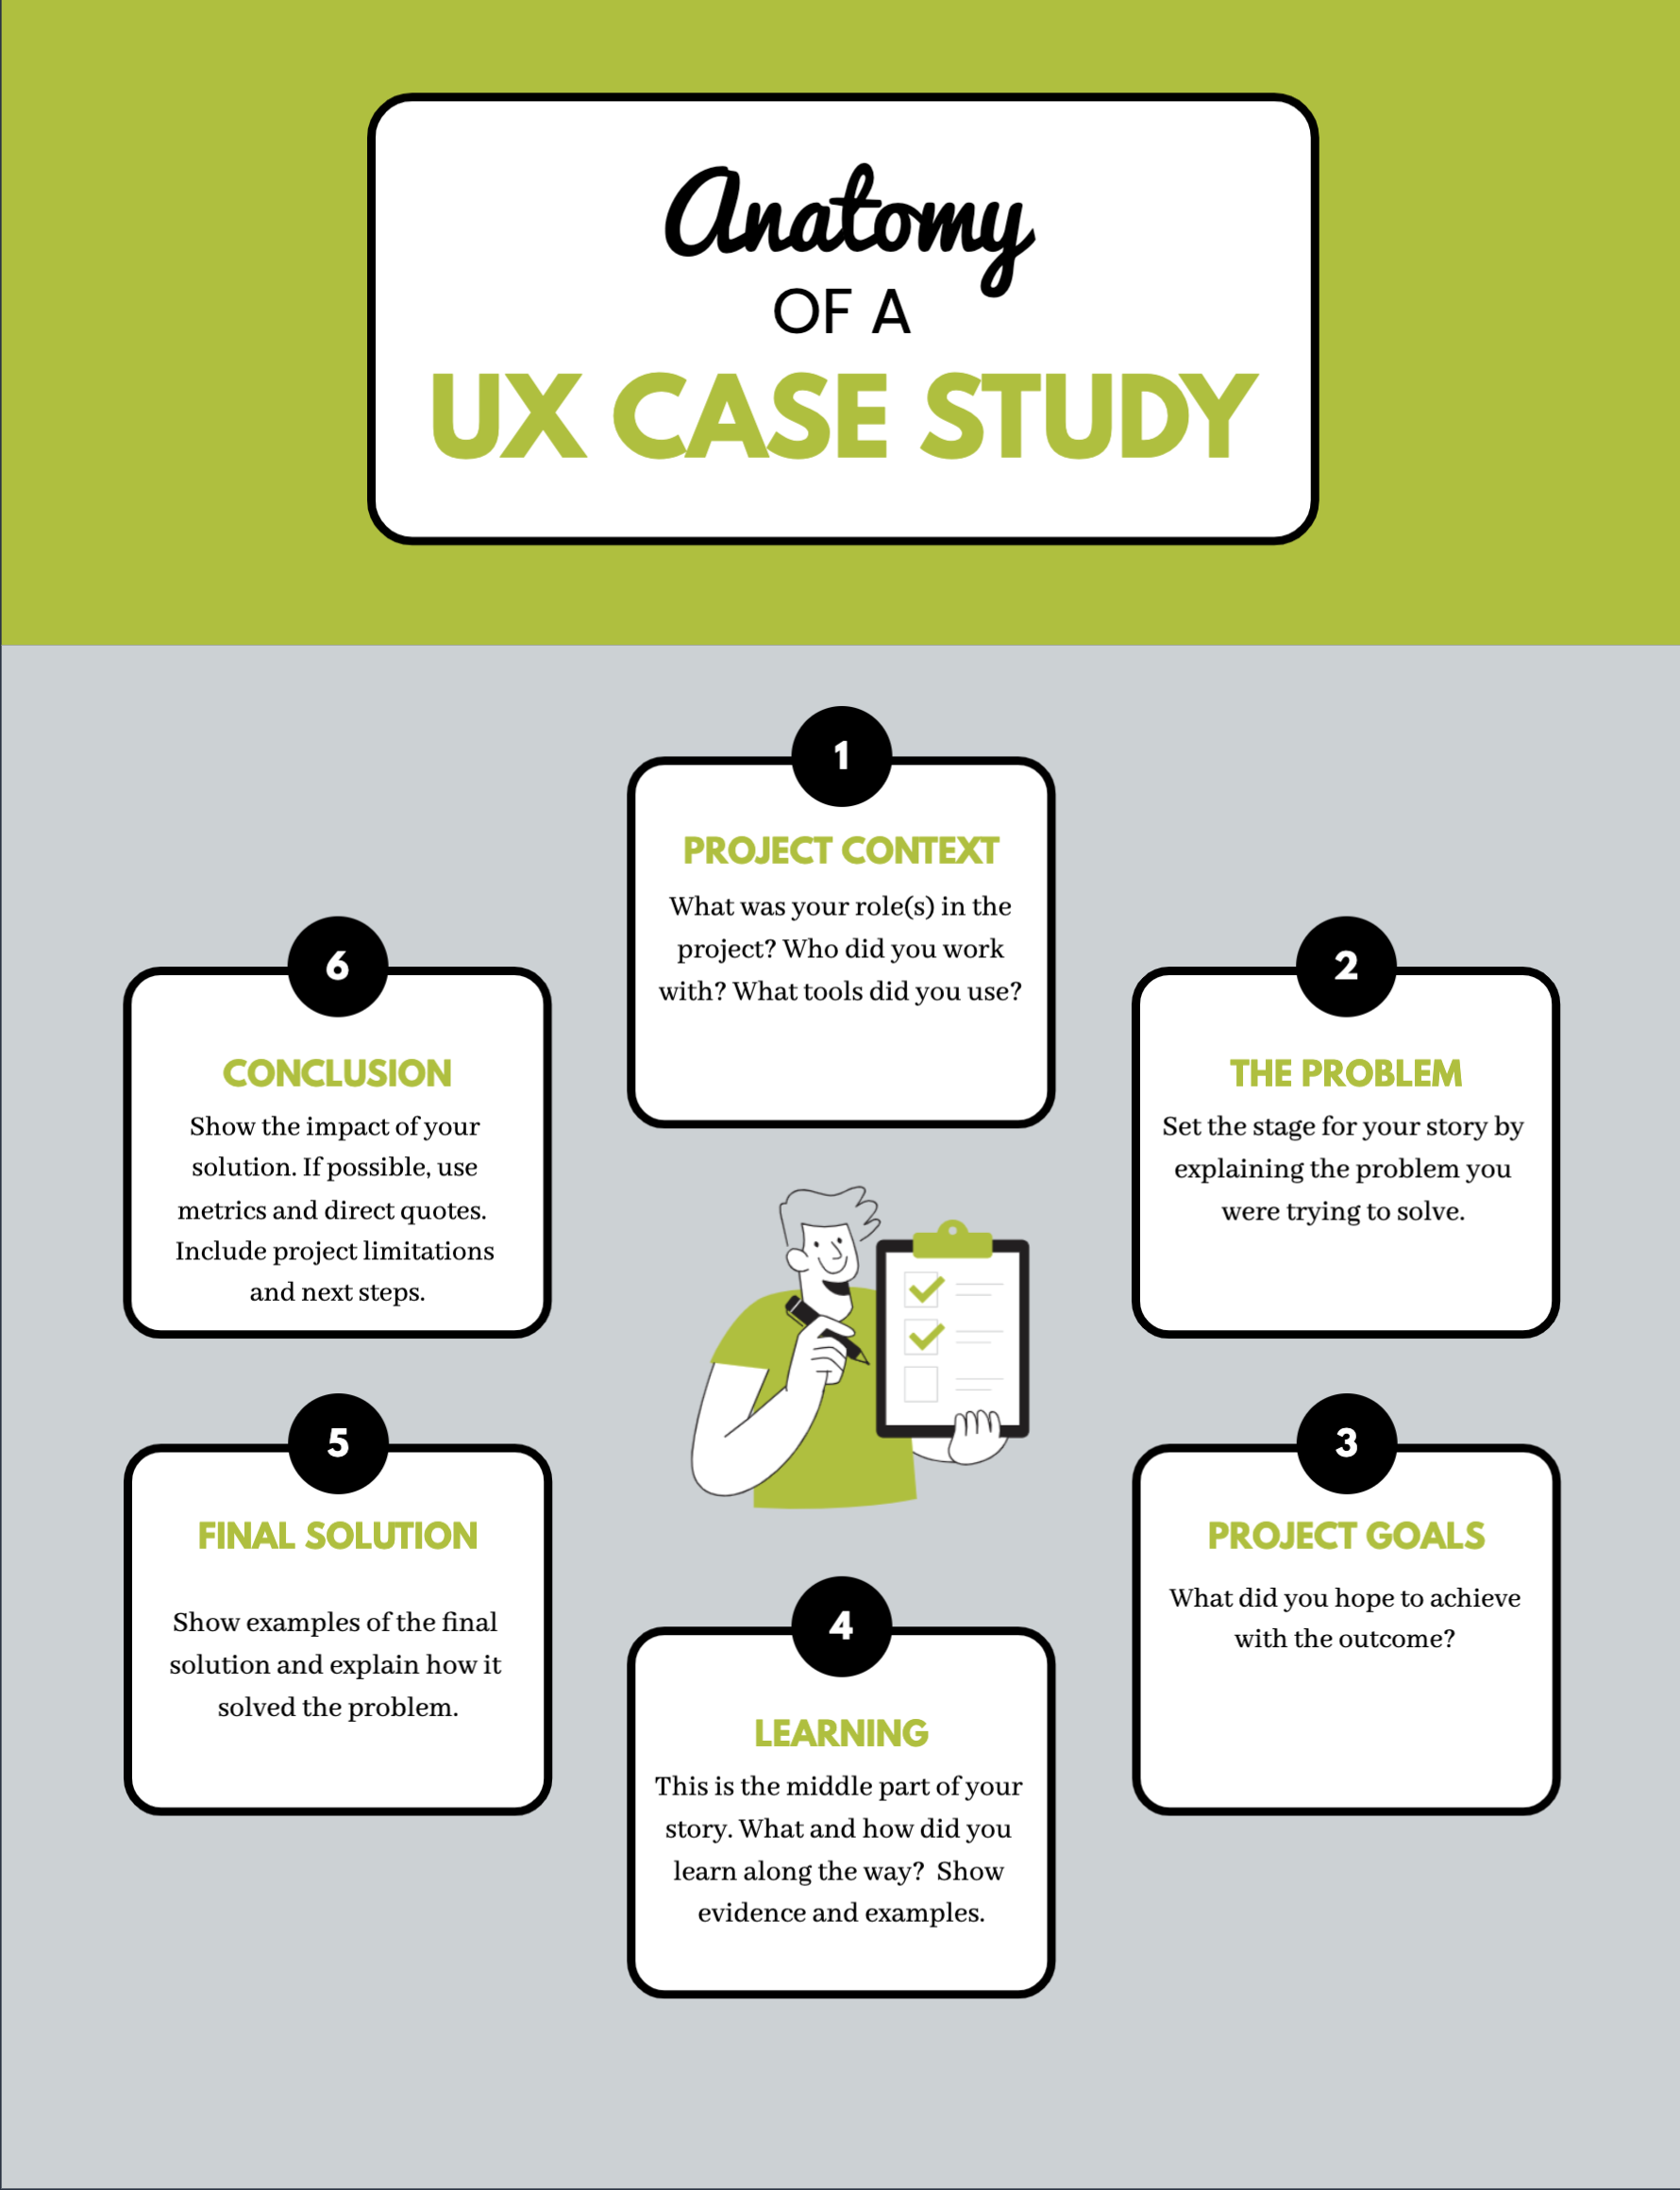 Anatomy of a UX Case Study. This infographic shows six steps: project context, the problem, project goals, learning, final solution, and conclusion.